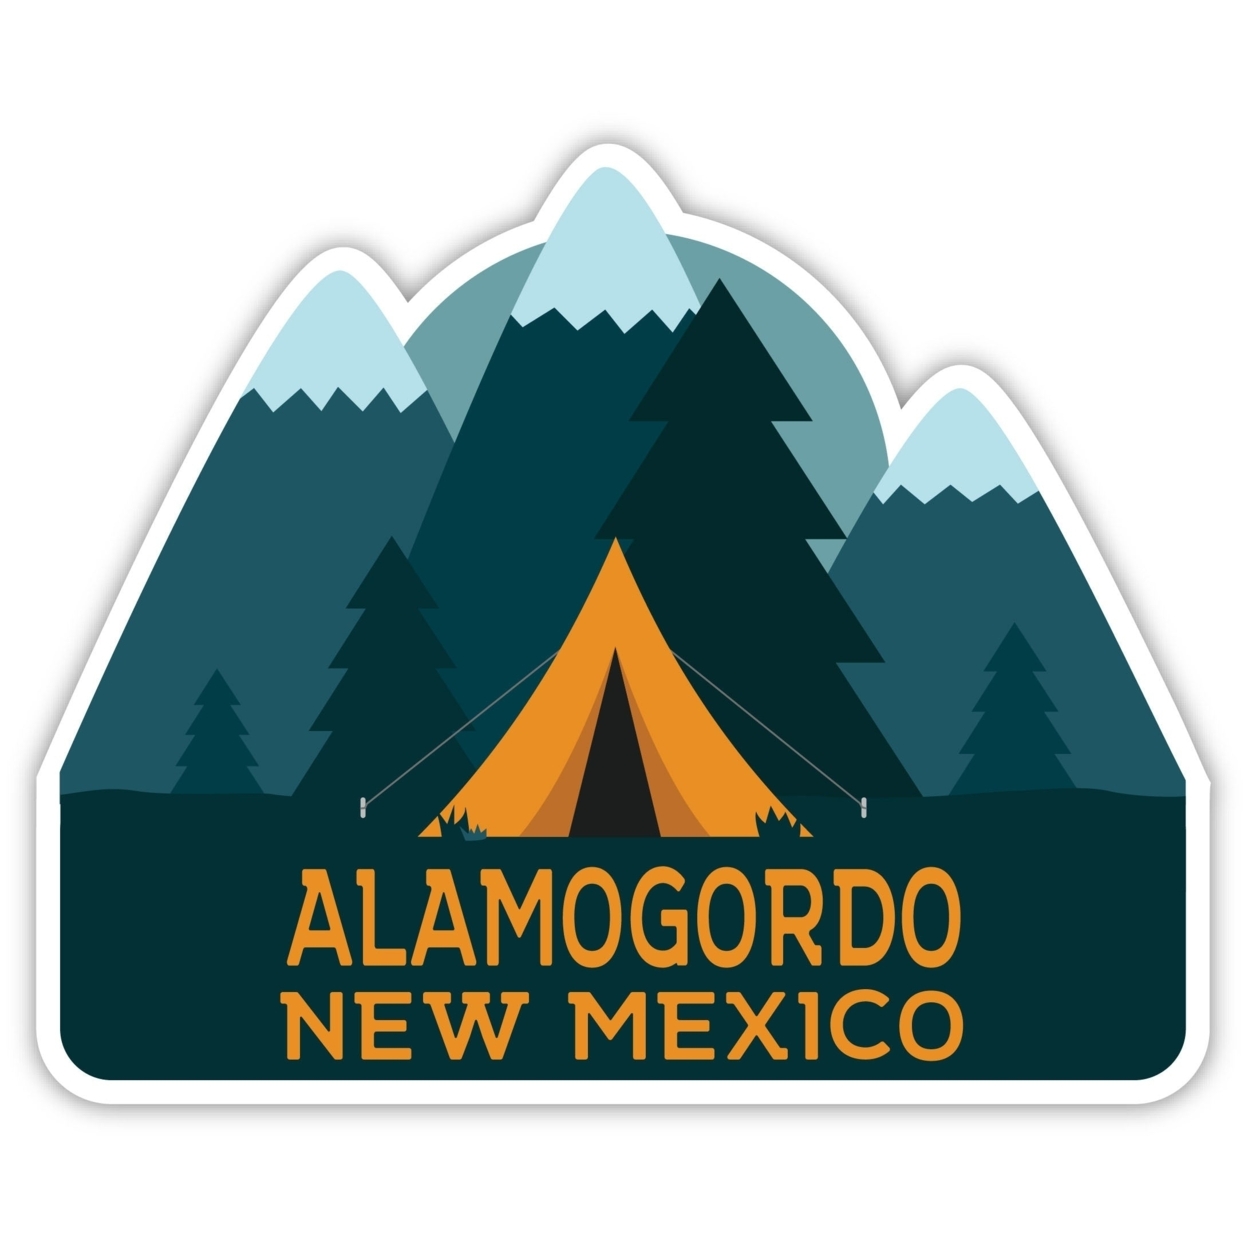 Alamogordo New Mexico Souvenir Decorative Stickers (Choose Theme And Size) - 4-Pack, 10-Inch, Adventures Awaits